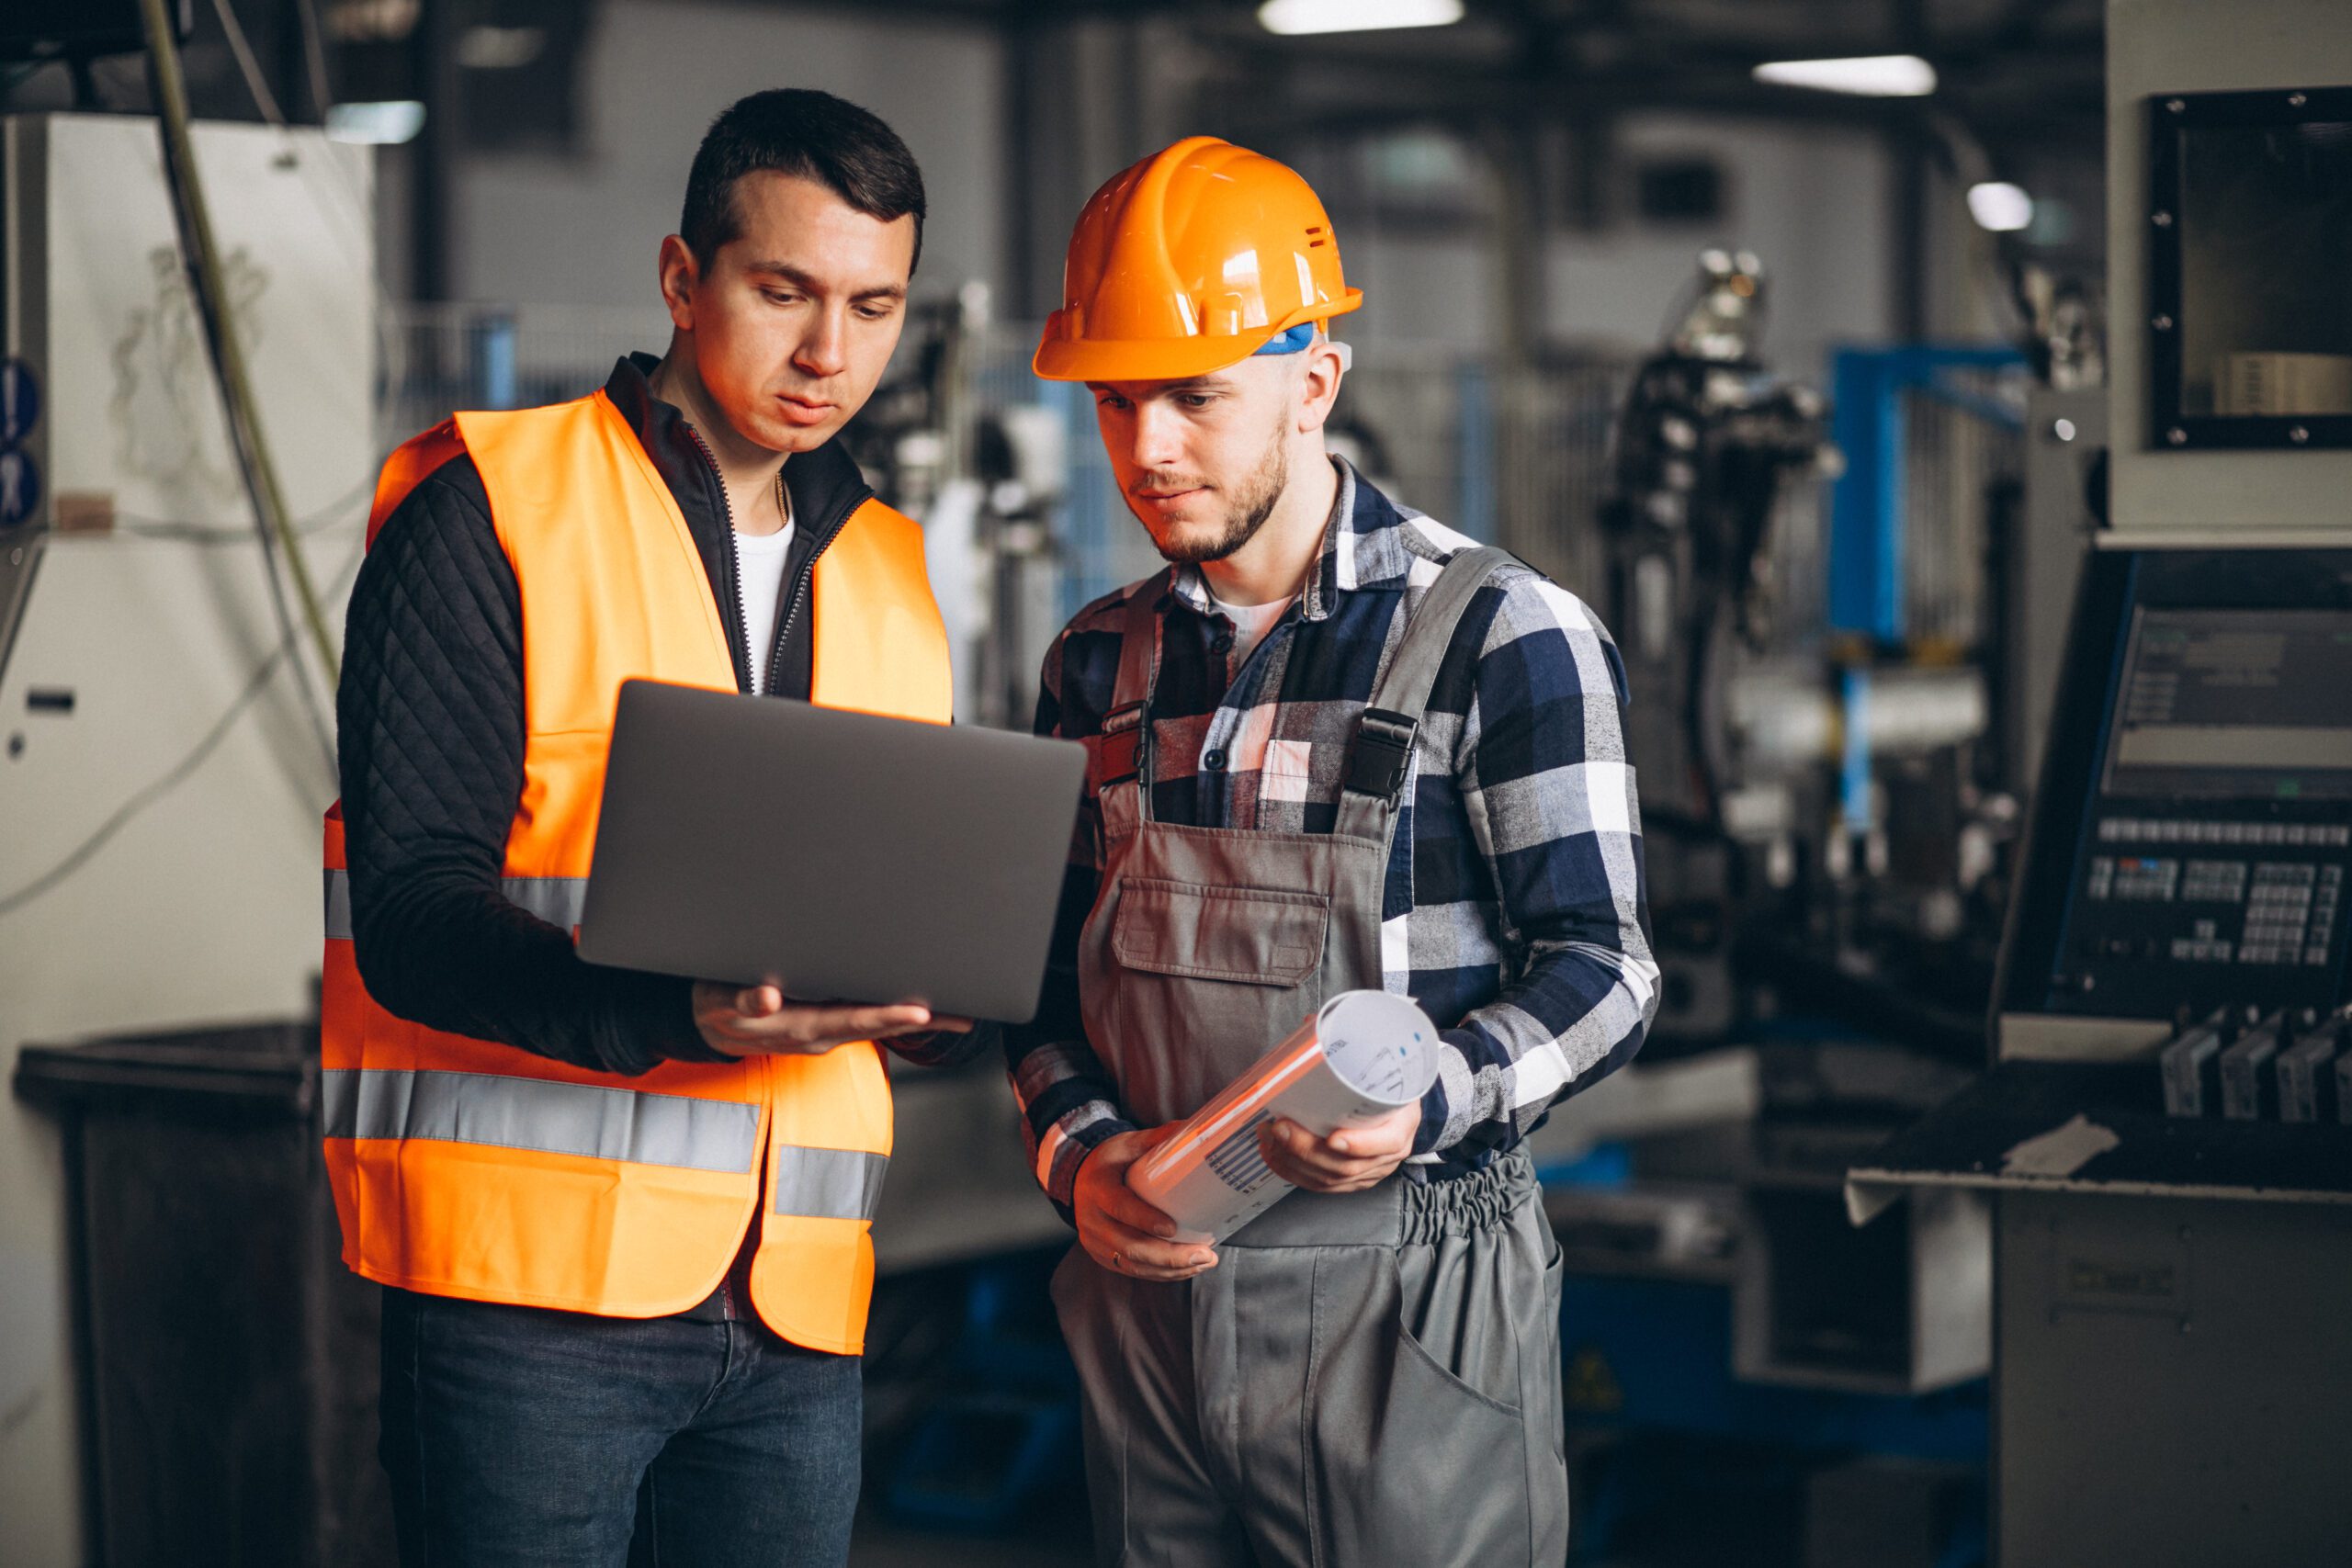 IT Implementation in Manufacturing: 5 Common Pitfalls and Solutions